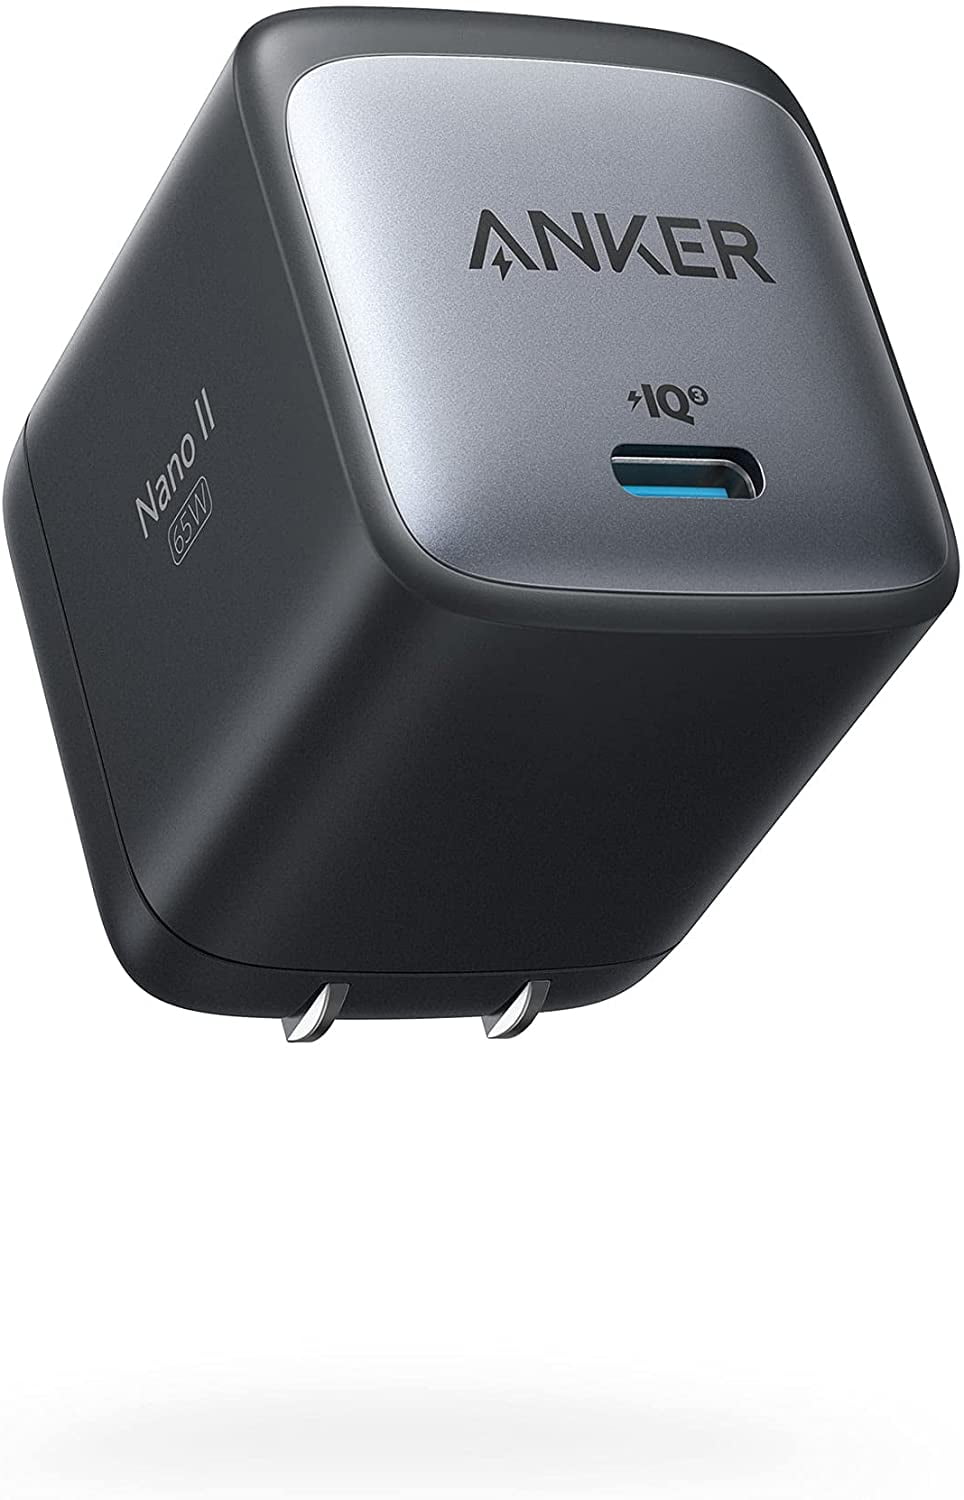 Anker Anker PowerDrive PD 2 (30W 2-port car charger) [Power Delivery  compatible / with PowerIQ / compact size] iPhone 11 / 11 Pro / 11 Pro Max /  XR / 8, iPad, Galaxy, Xperia and various Android devices Compatible with 